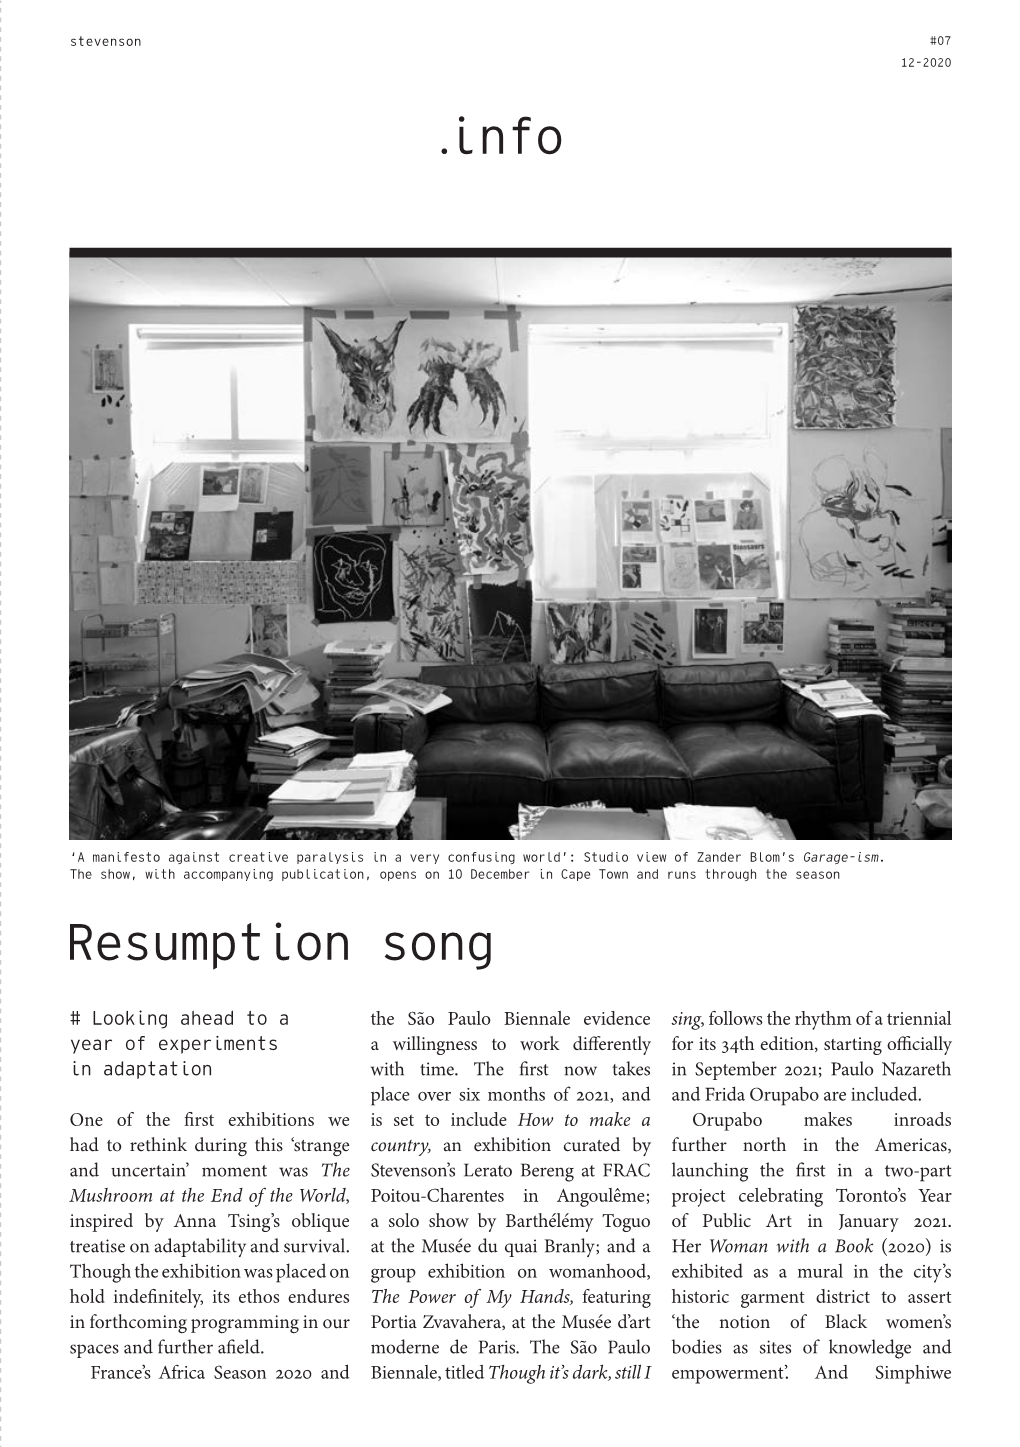 Resumption Song .Info